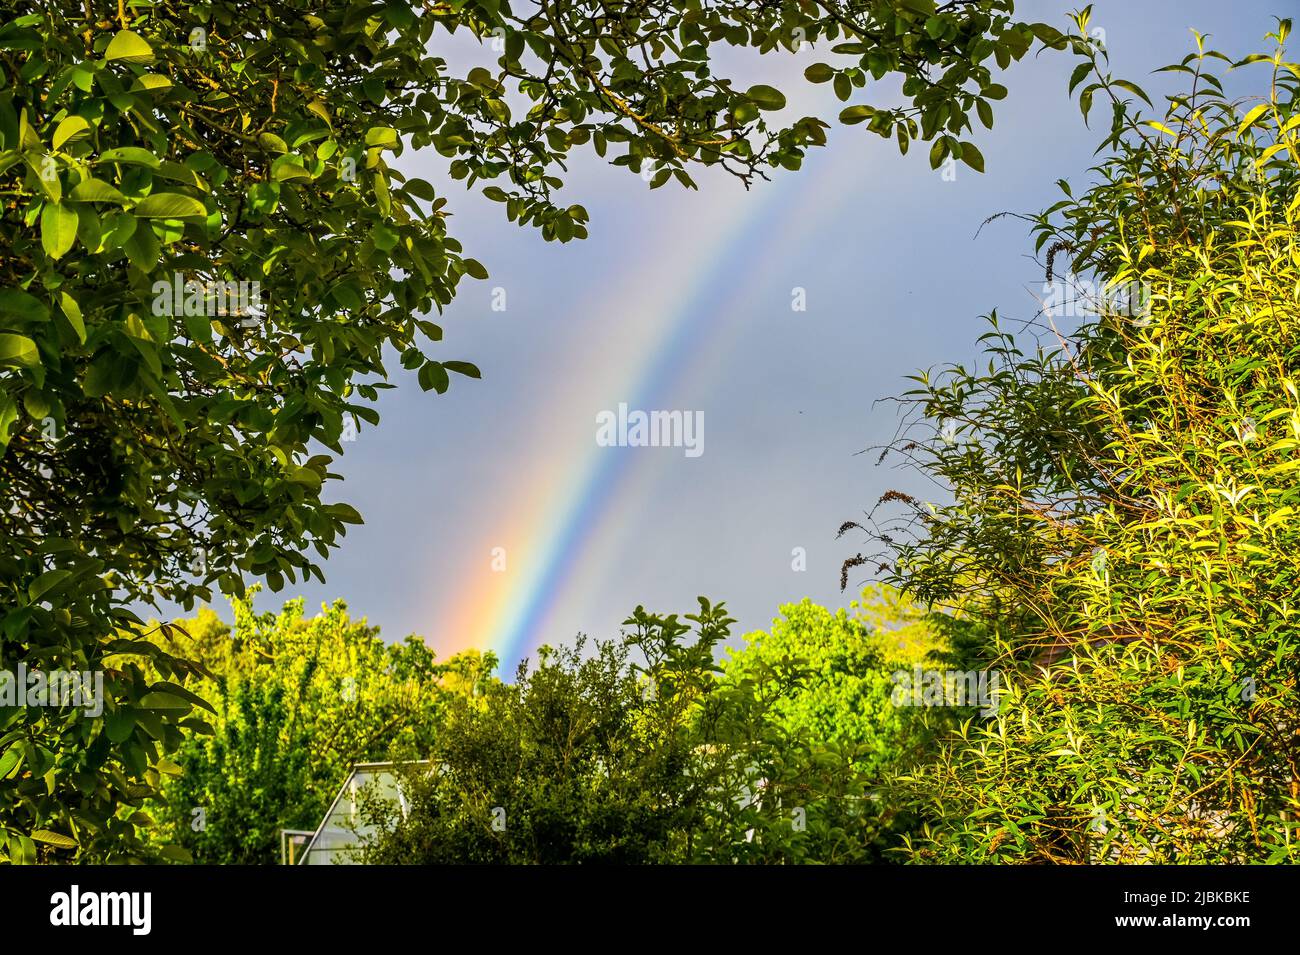 A rainbows, multicolored arc, optical phenomenon section framed by vegetation with the backdrop of a dark grey sky Stock Photo